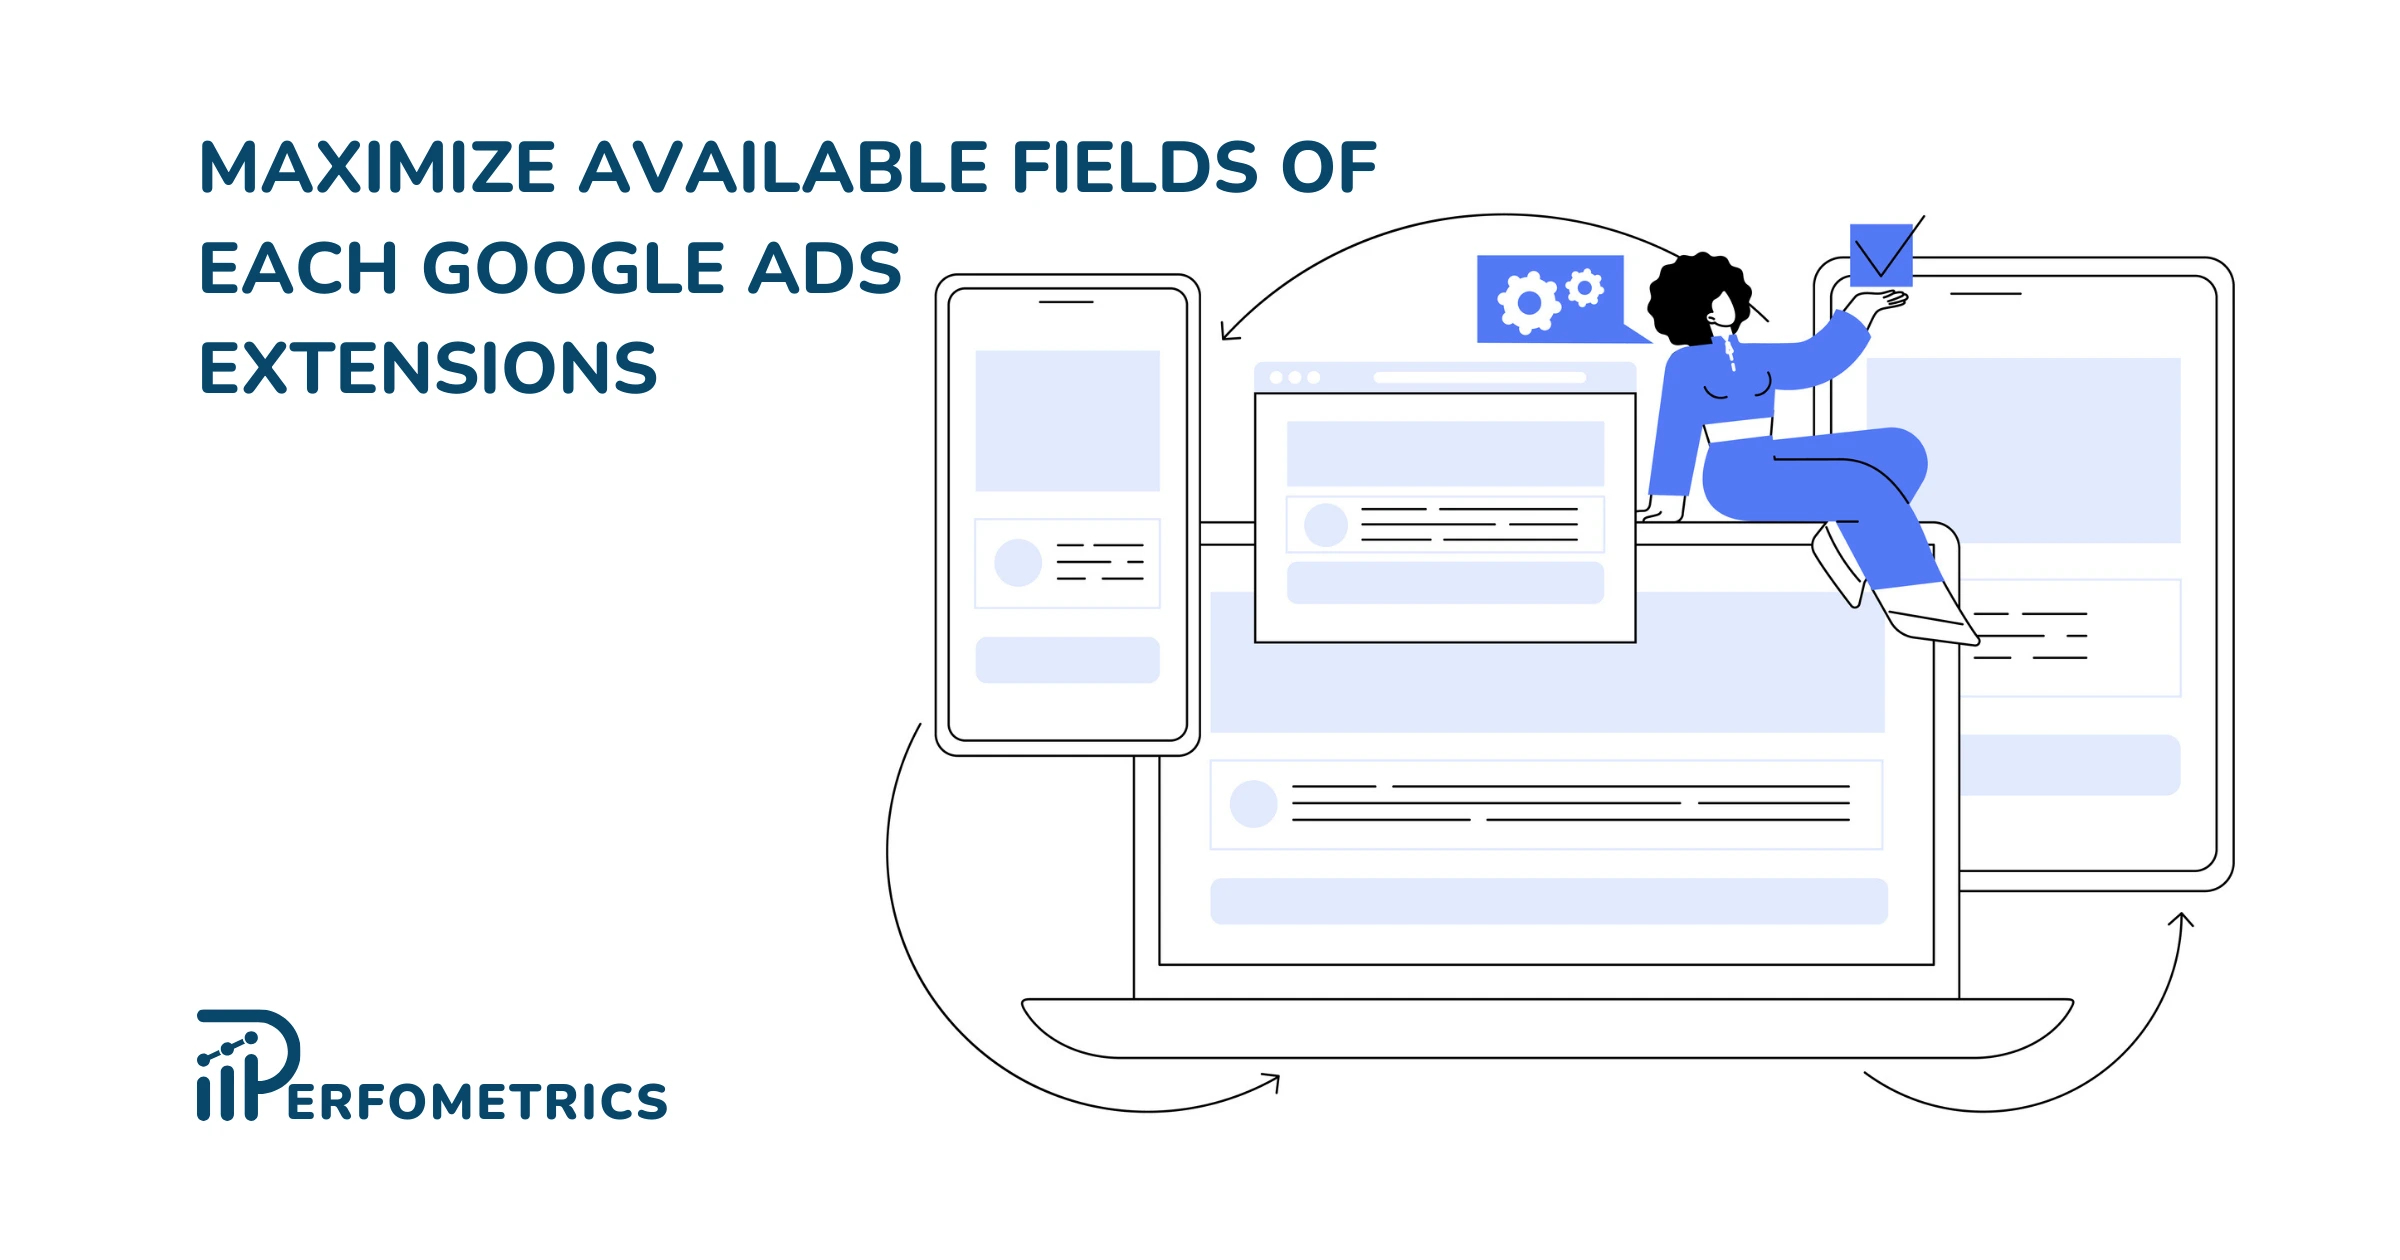 Maximize the Available Fields of Google Ad Extensions